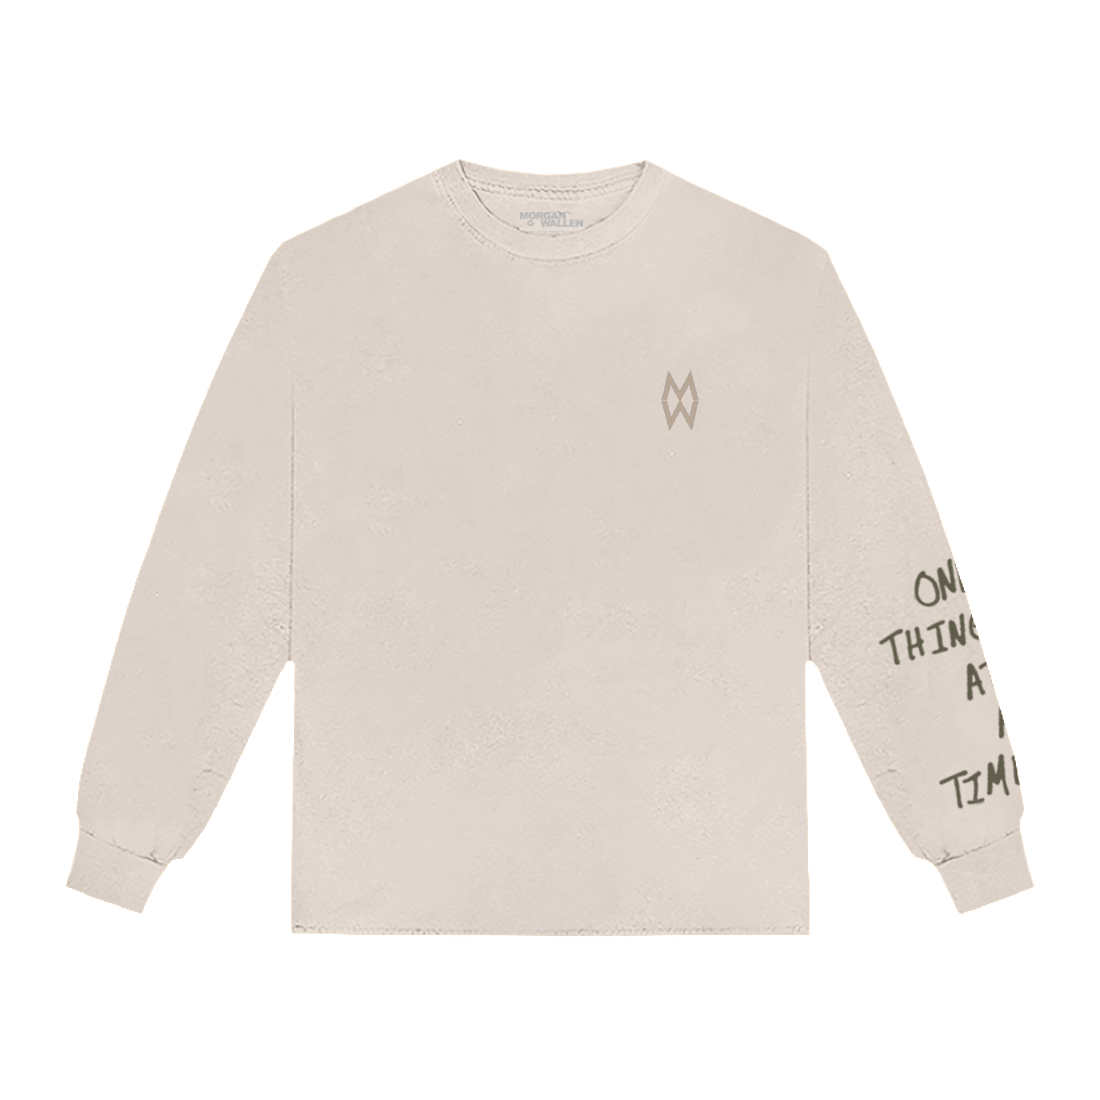 Morgan Wallen - One Thing At A Time Album Cover Off-White Long Sleeve T-Shirt